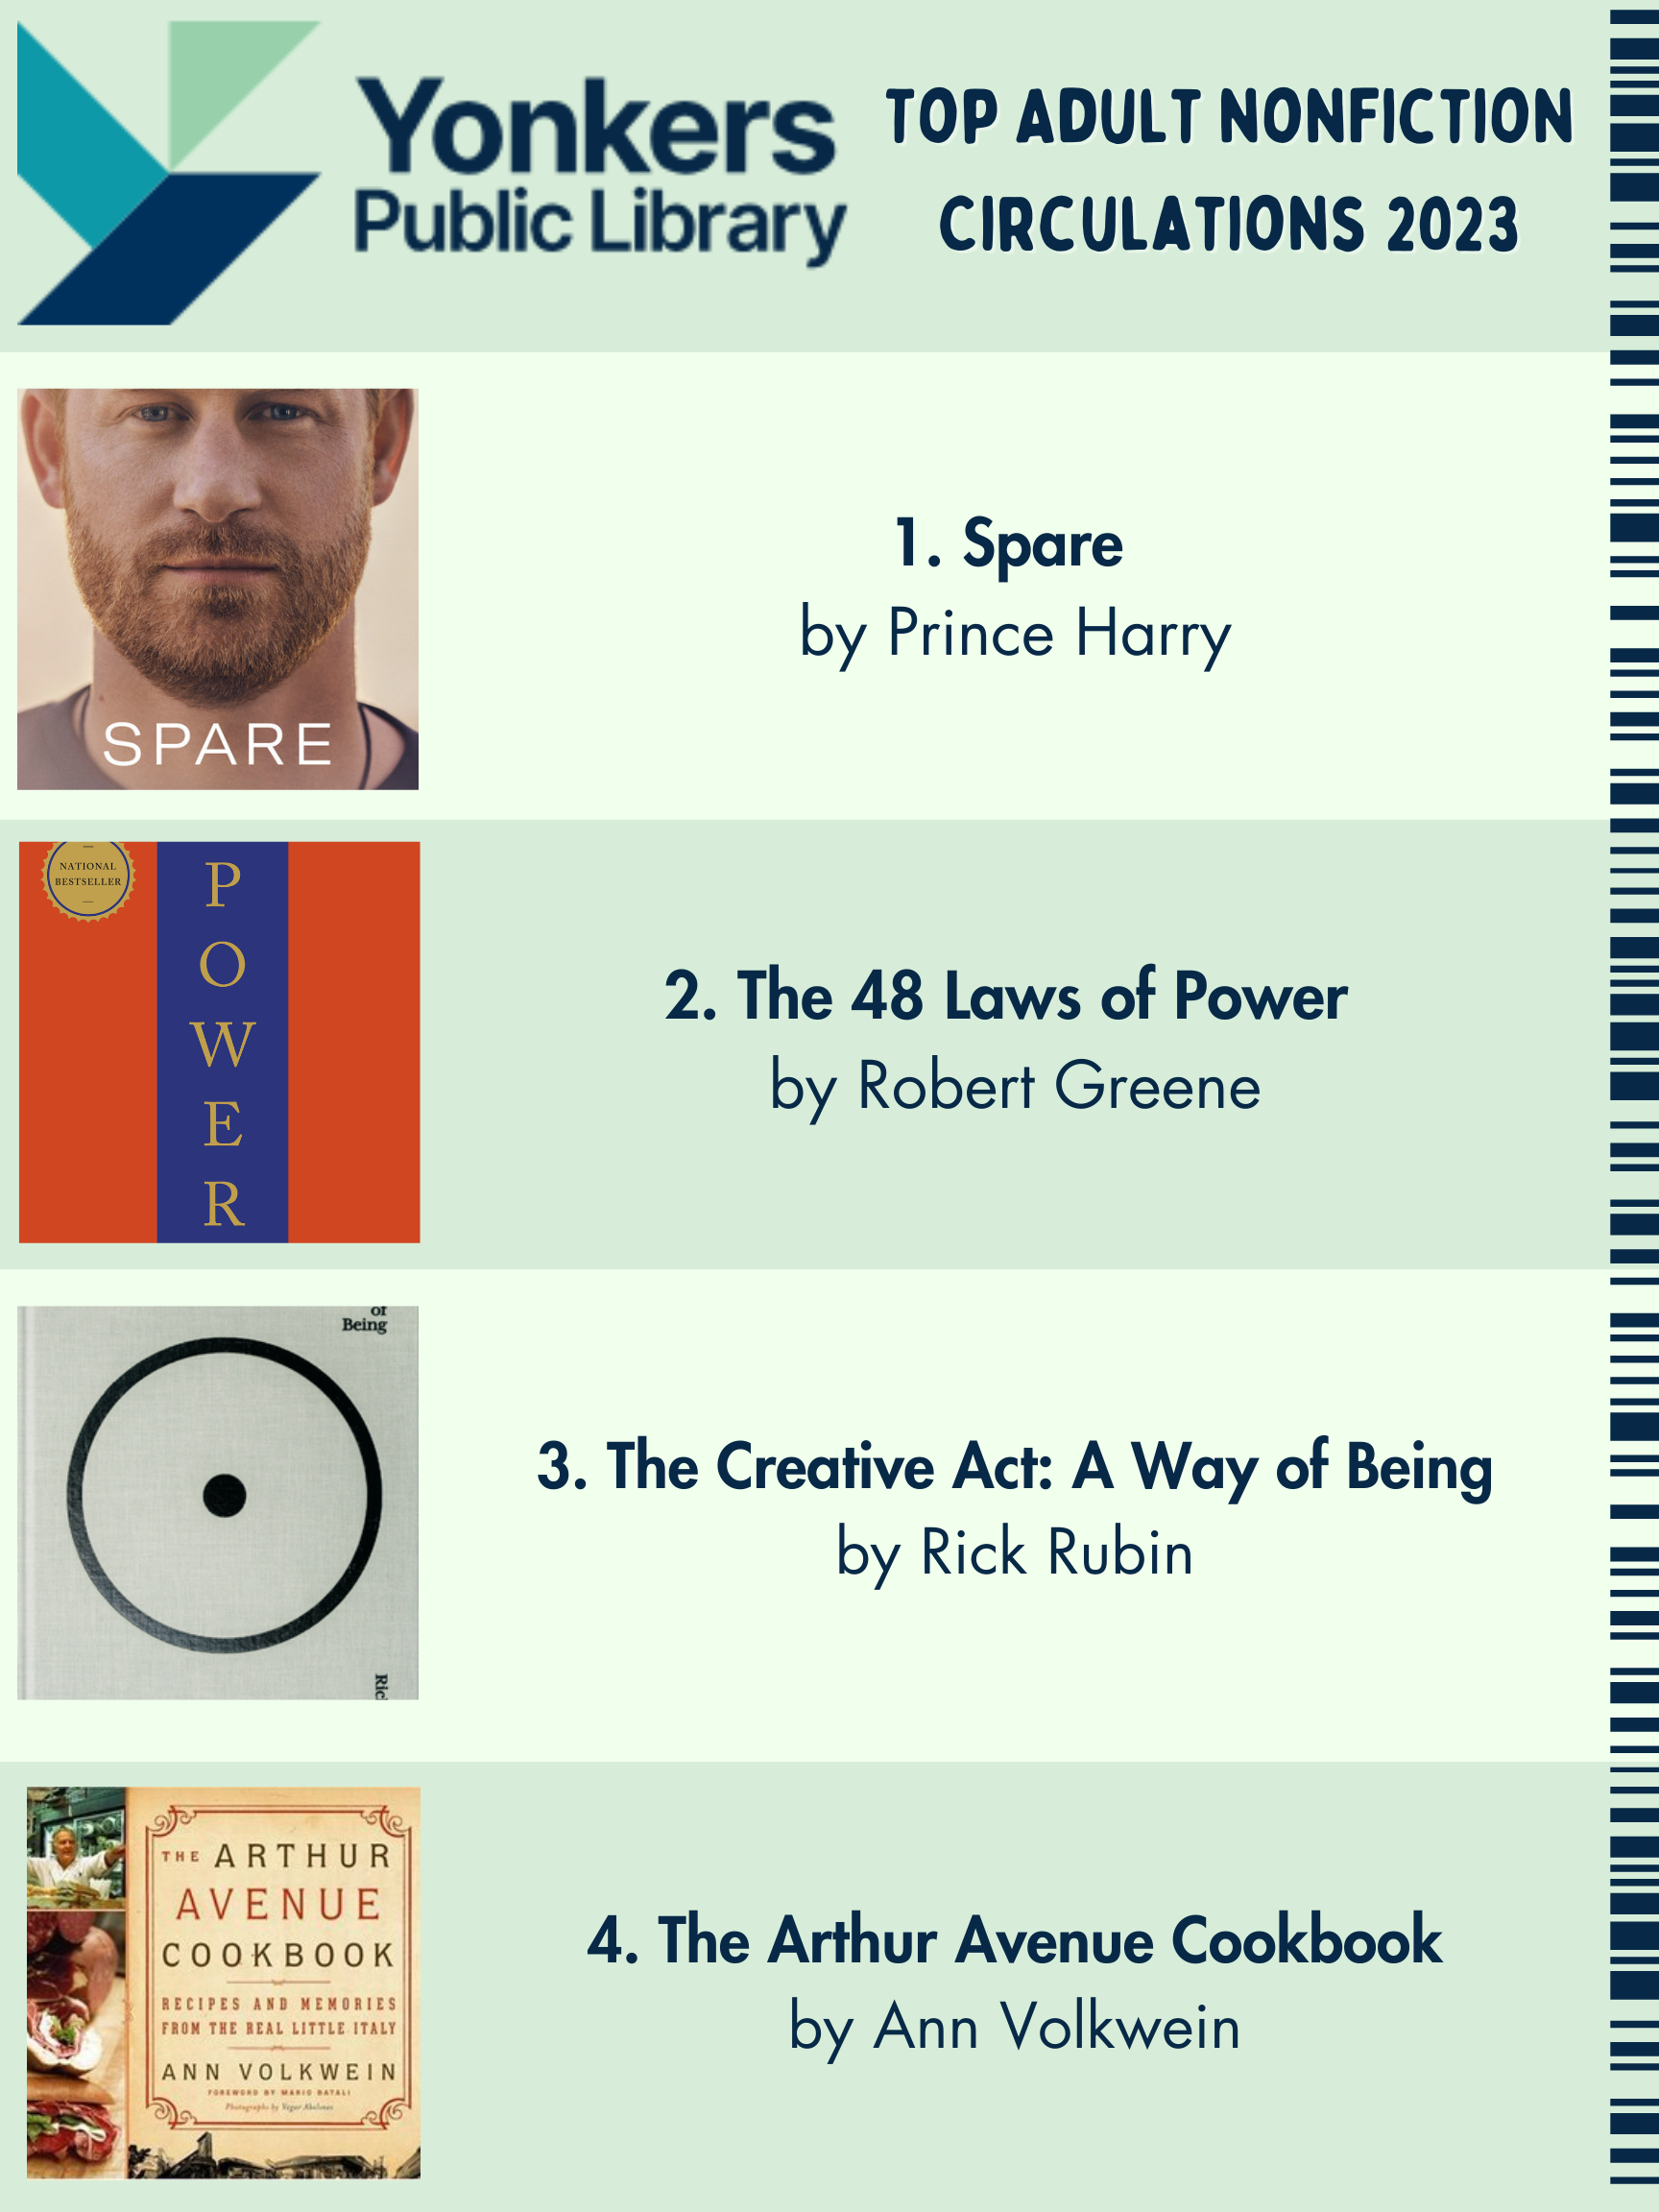 Top Adult Nonfiction Circulations 2023. Spare, The 48 Laws of Power, The Creative Act: A Way of Being and The Arthur Avenue Cookbook.